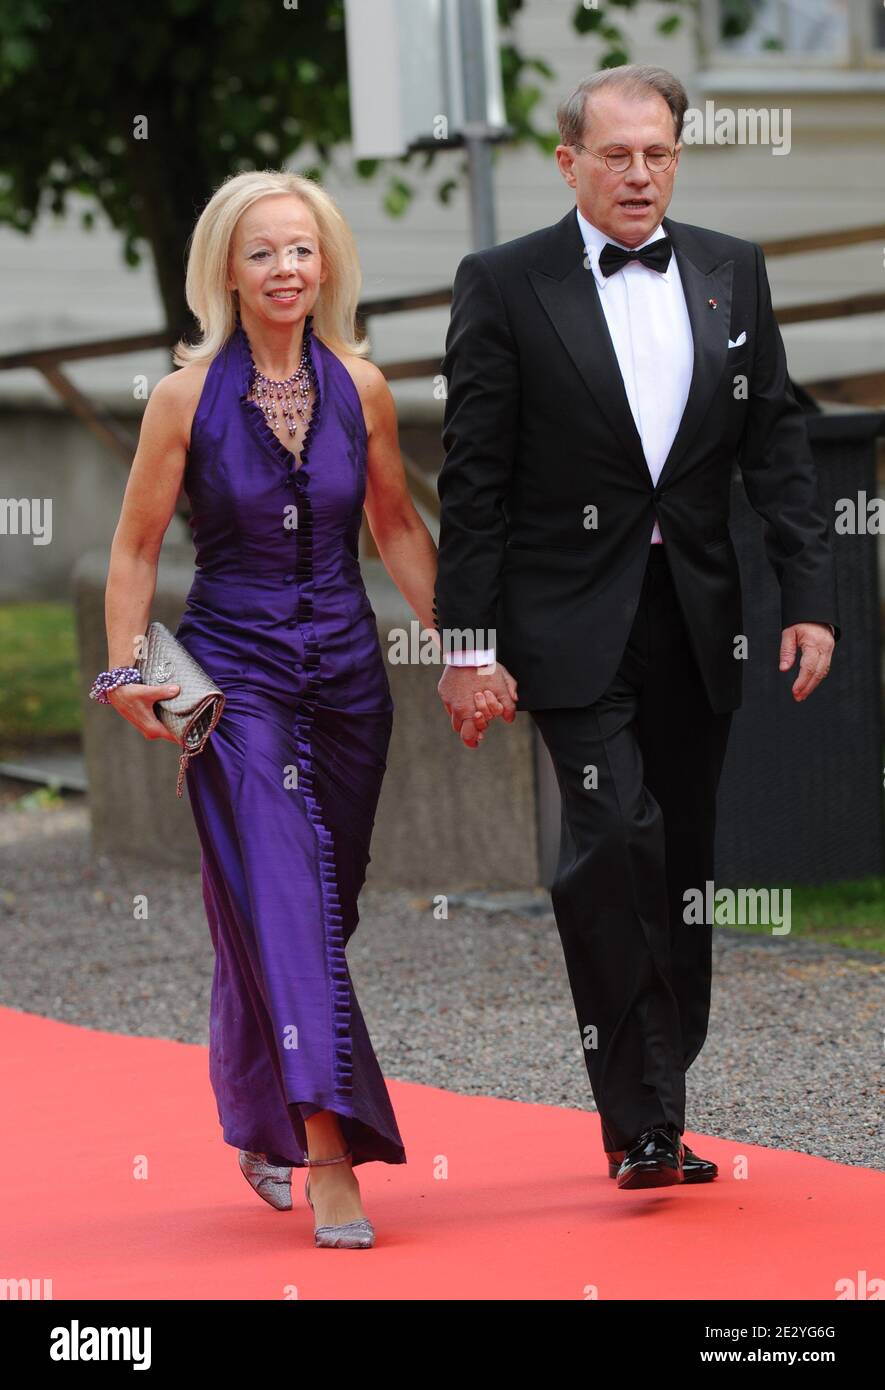 Swedish Parliament Speaker Per Westerberg with wife Ylva arriving at the Swedish government dinner in honour of H.R.H. Crown Princess Victoria and Mr Daniel Westling held at the Eric Ericson hall in Stockholm, Sweden on June 18, 2010. Photo by Mousse-Nebinger-Orban/ABACAPRESS.COM Stock Photo